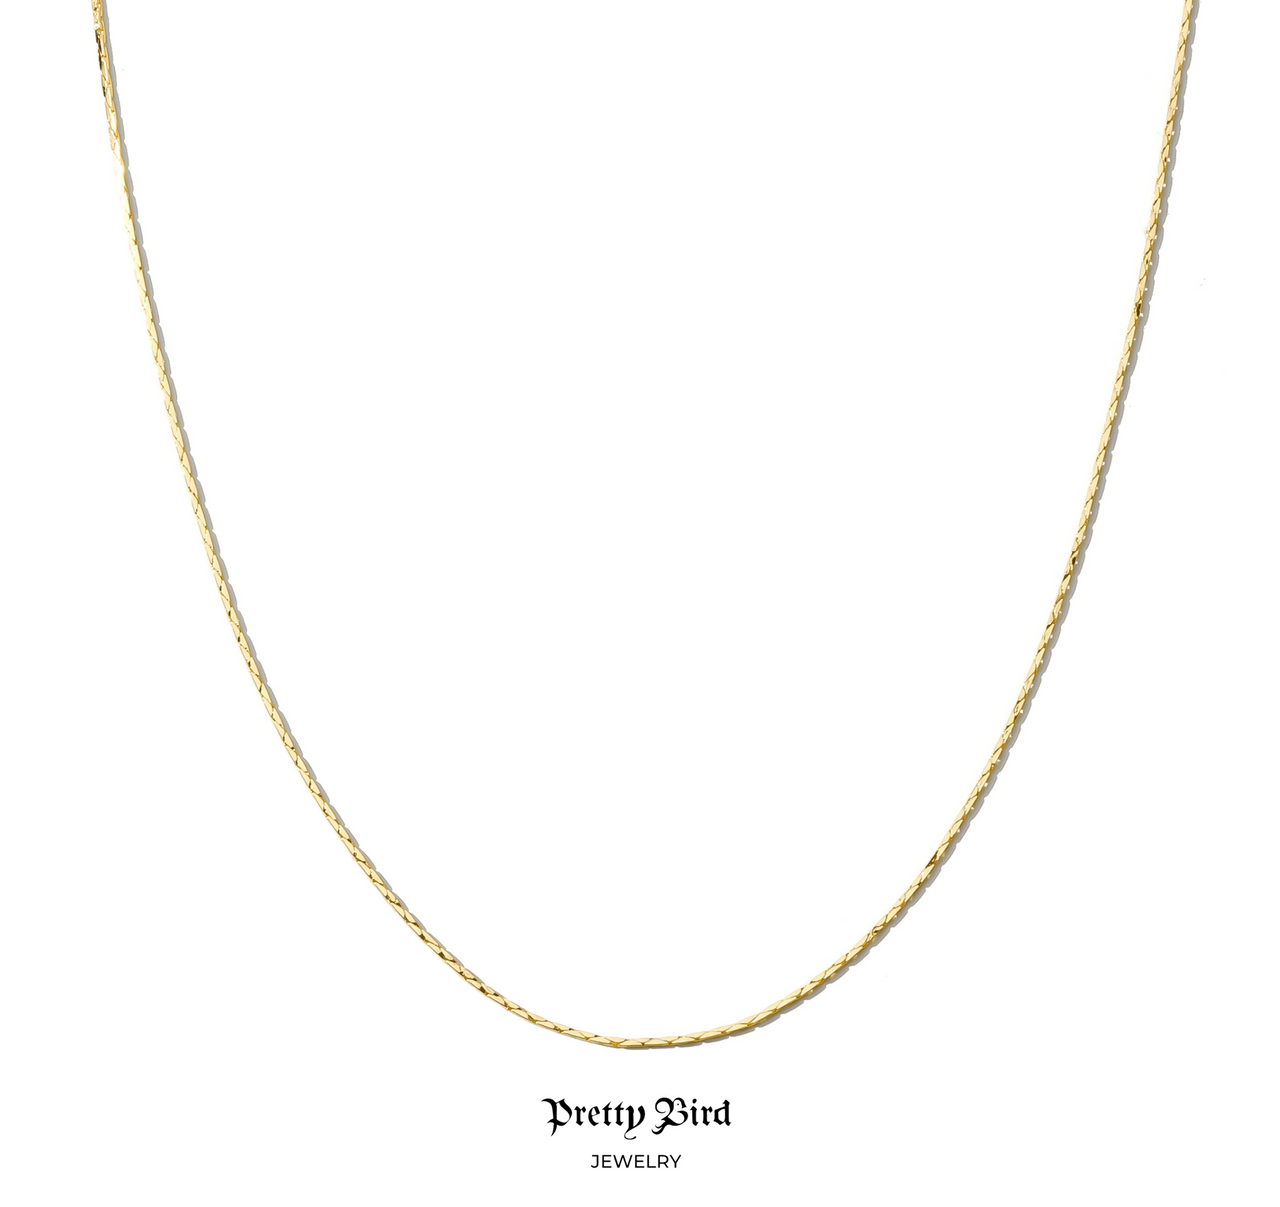 The Skinny Snake Chain Necklace